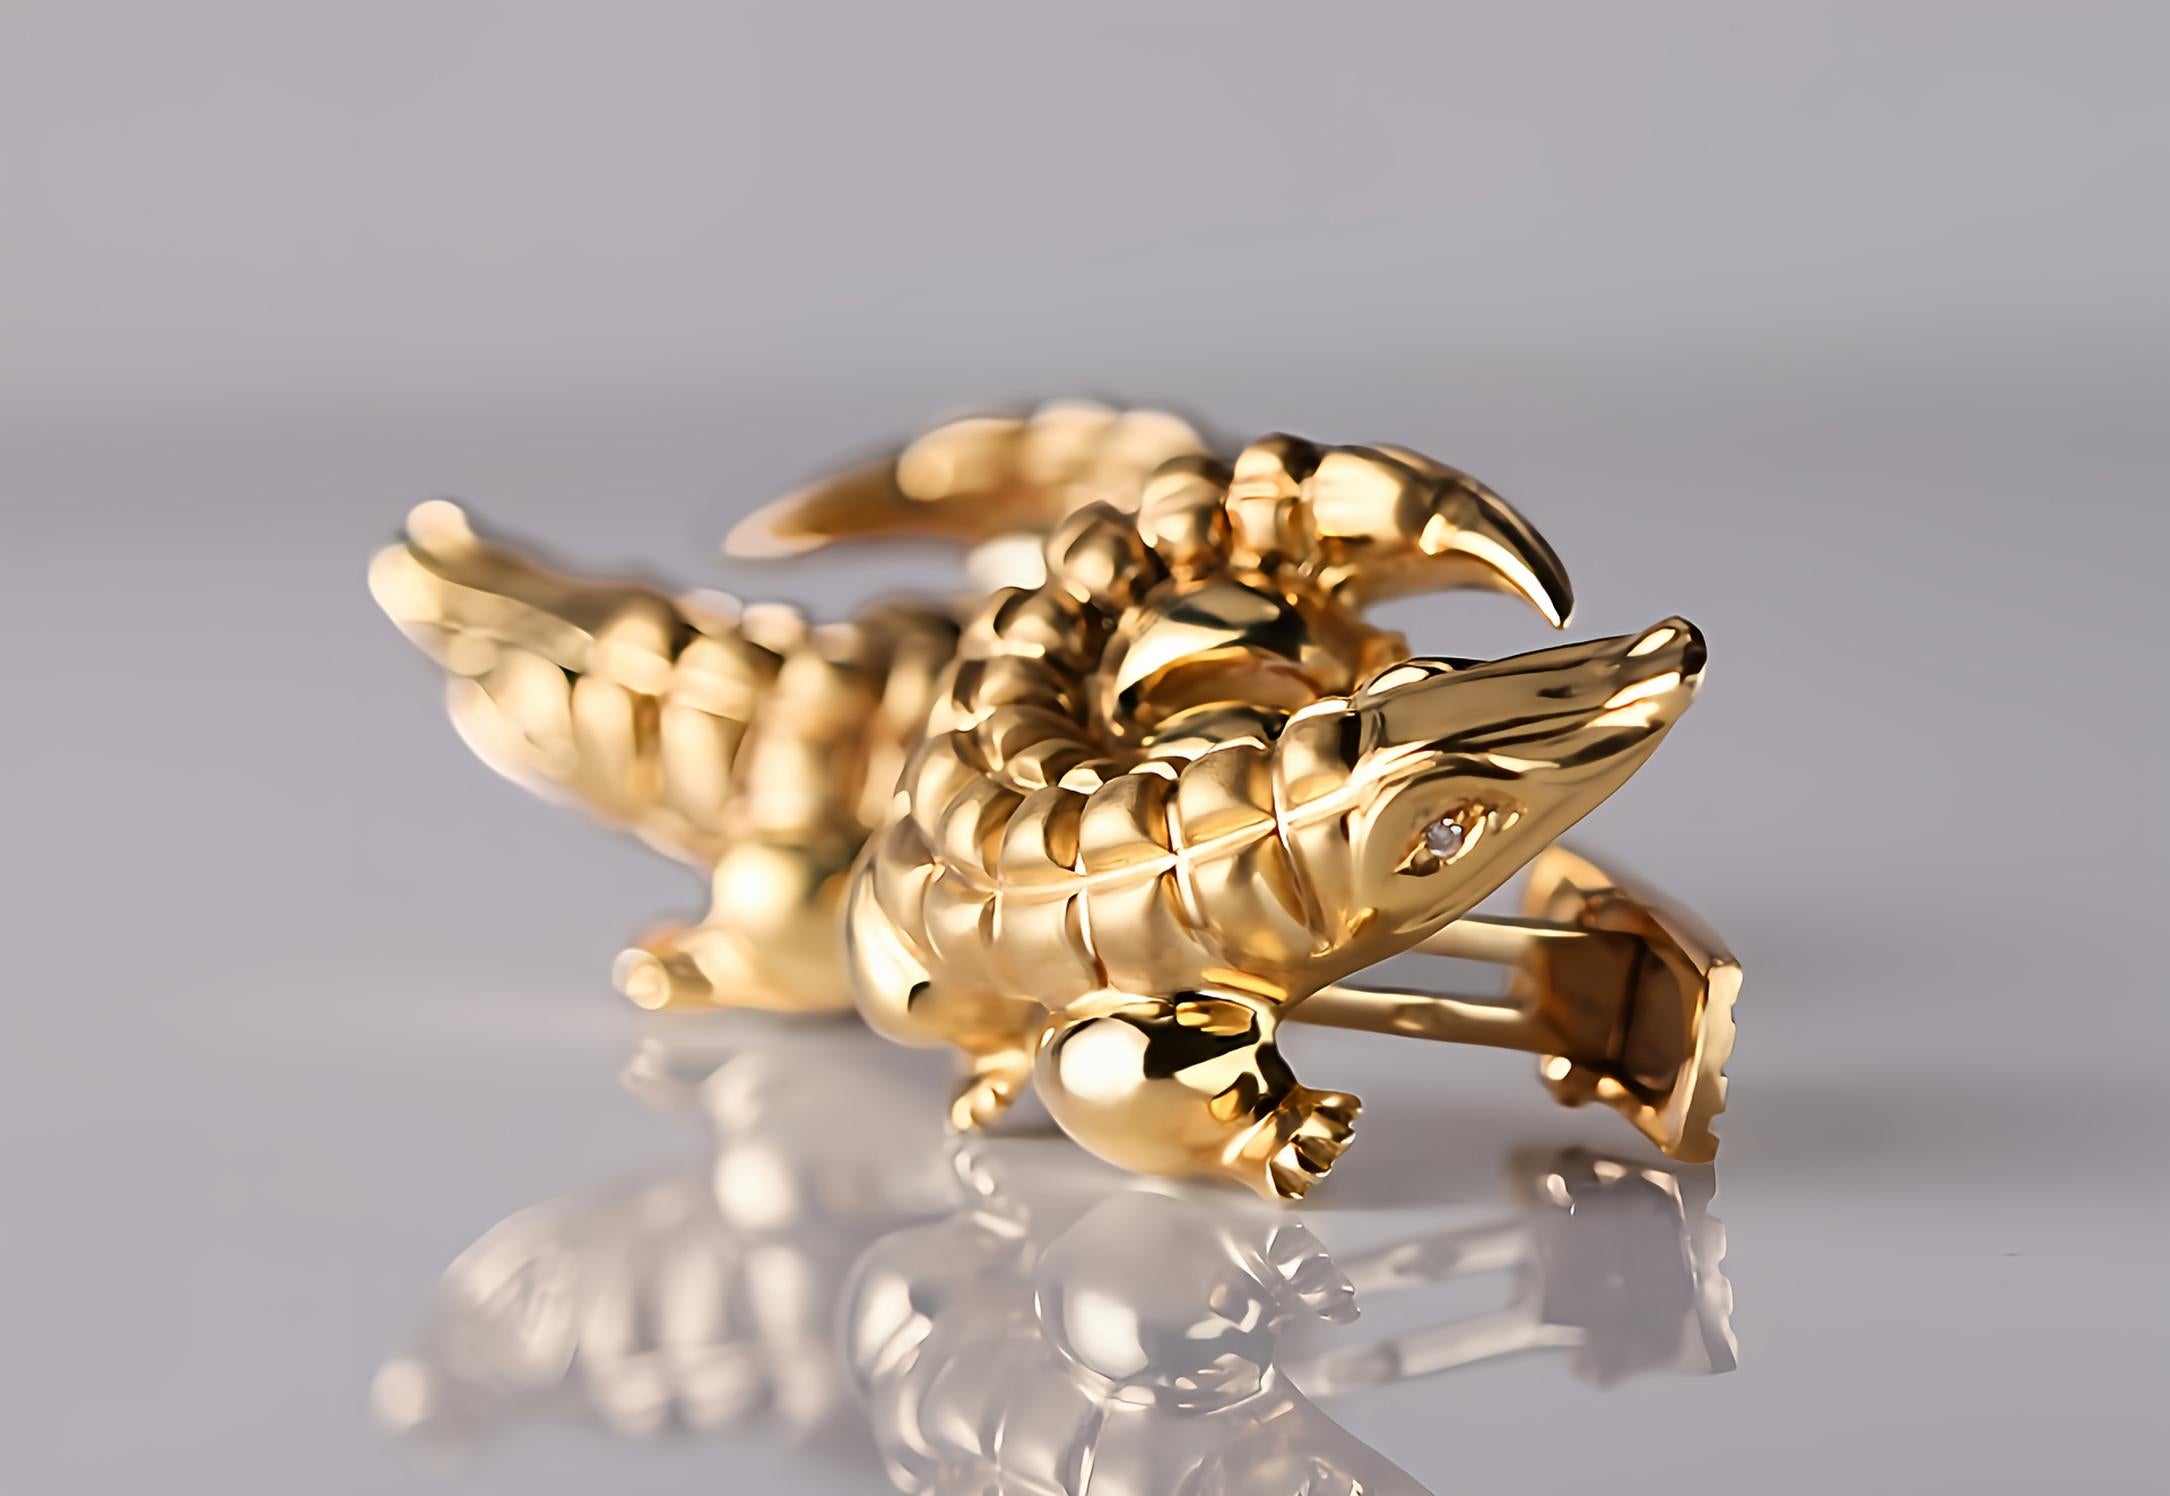 Add a touch of extravagant elegance to your outfit with these handcrafted 18kt yellow gold cufflinks. Created by skilled Florentine artisans, these cufflinks embody meticulous attention to detail. 

The body of the crocodile features a satin finish